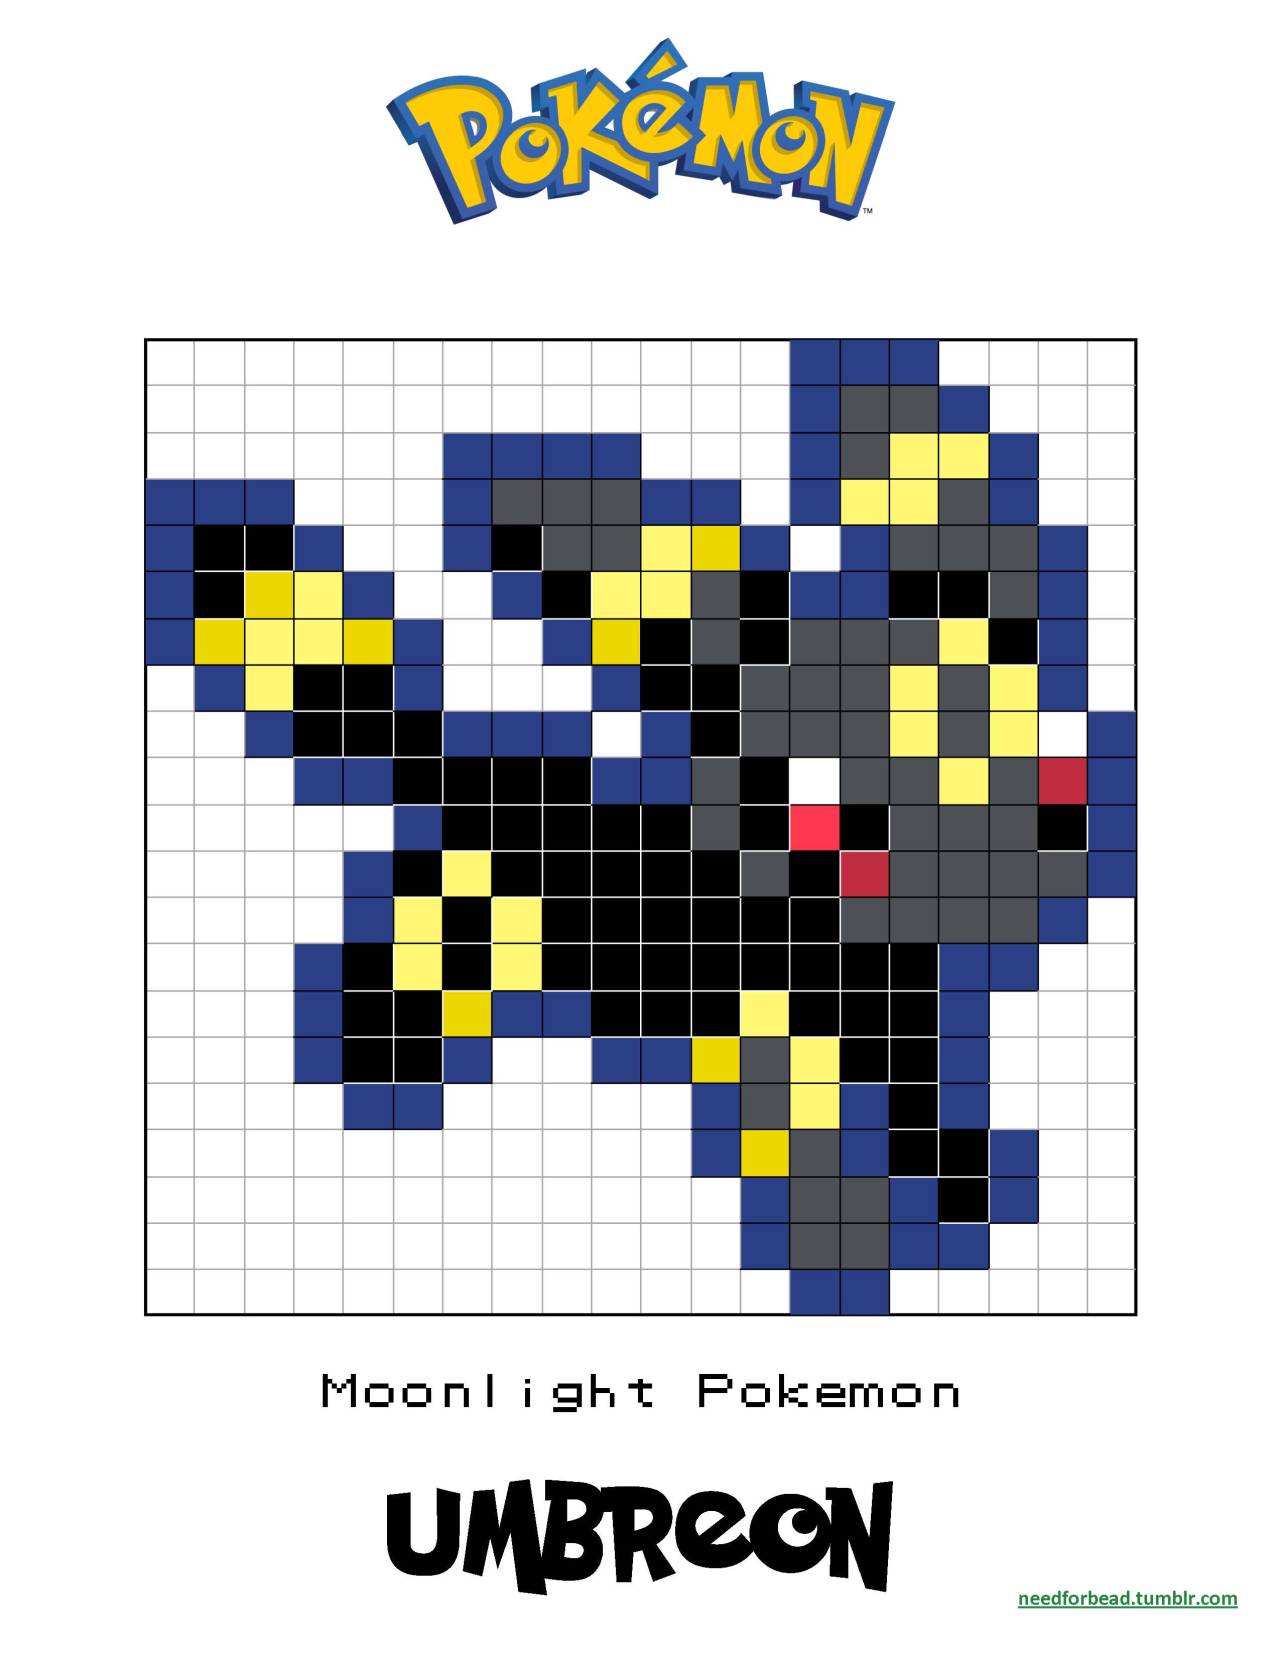 Pokemon: Umbreon Pokemon is managed by The... - Need for Bead